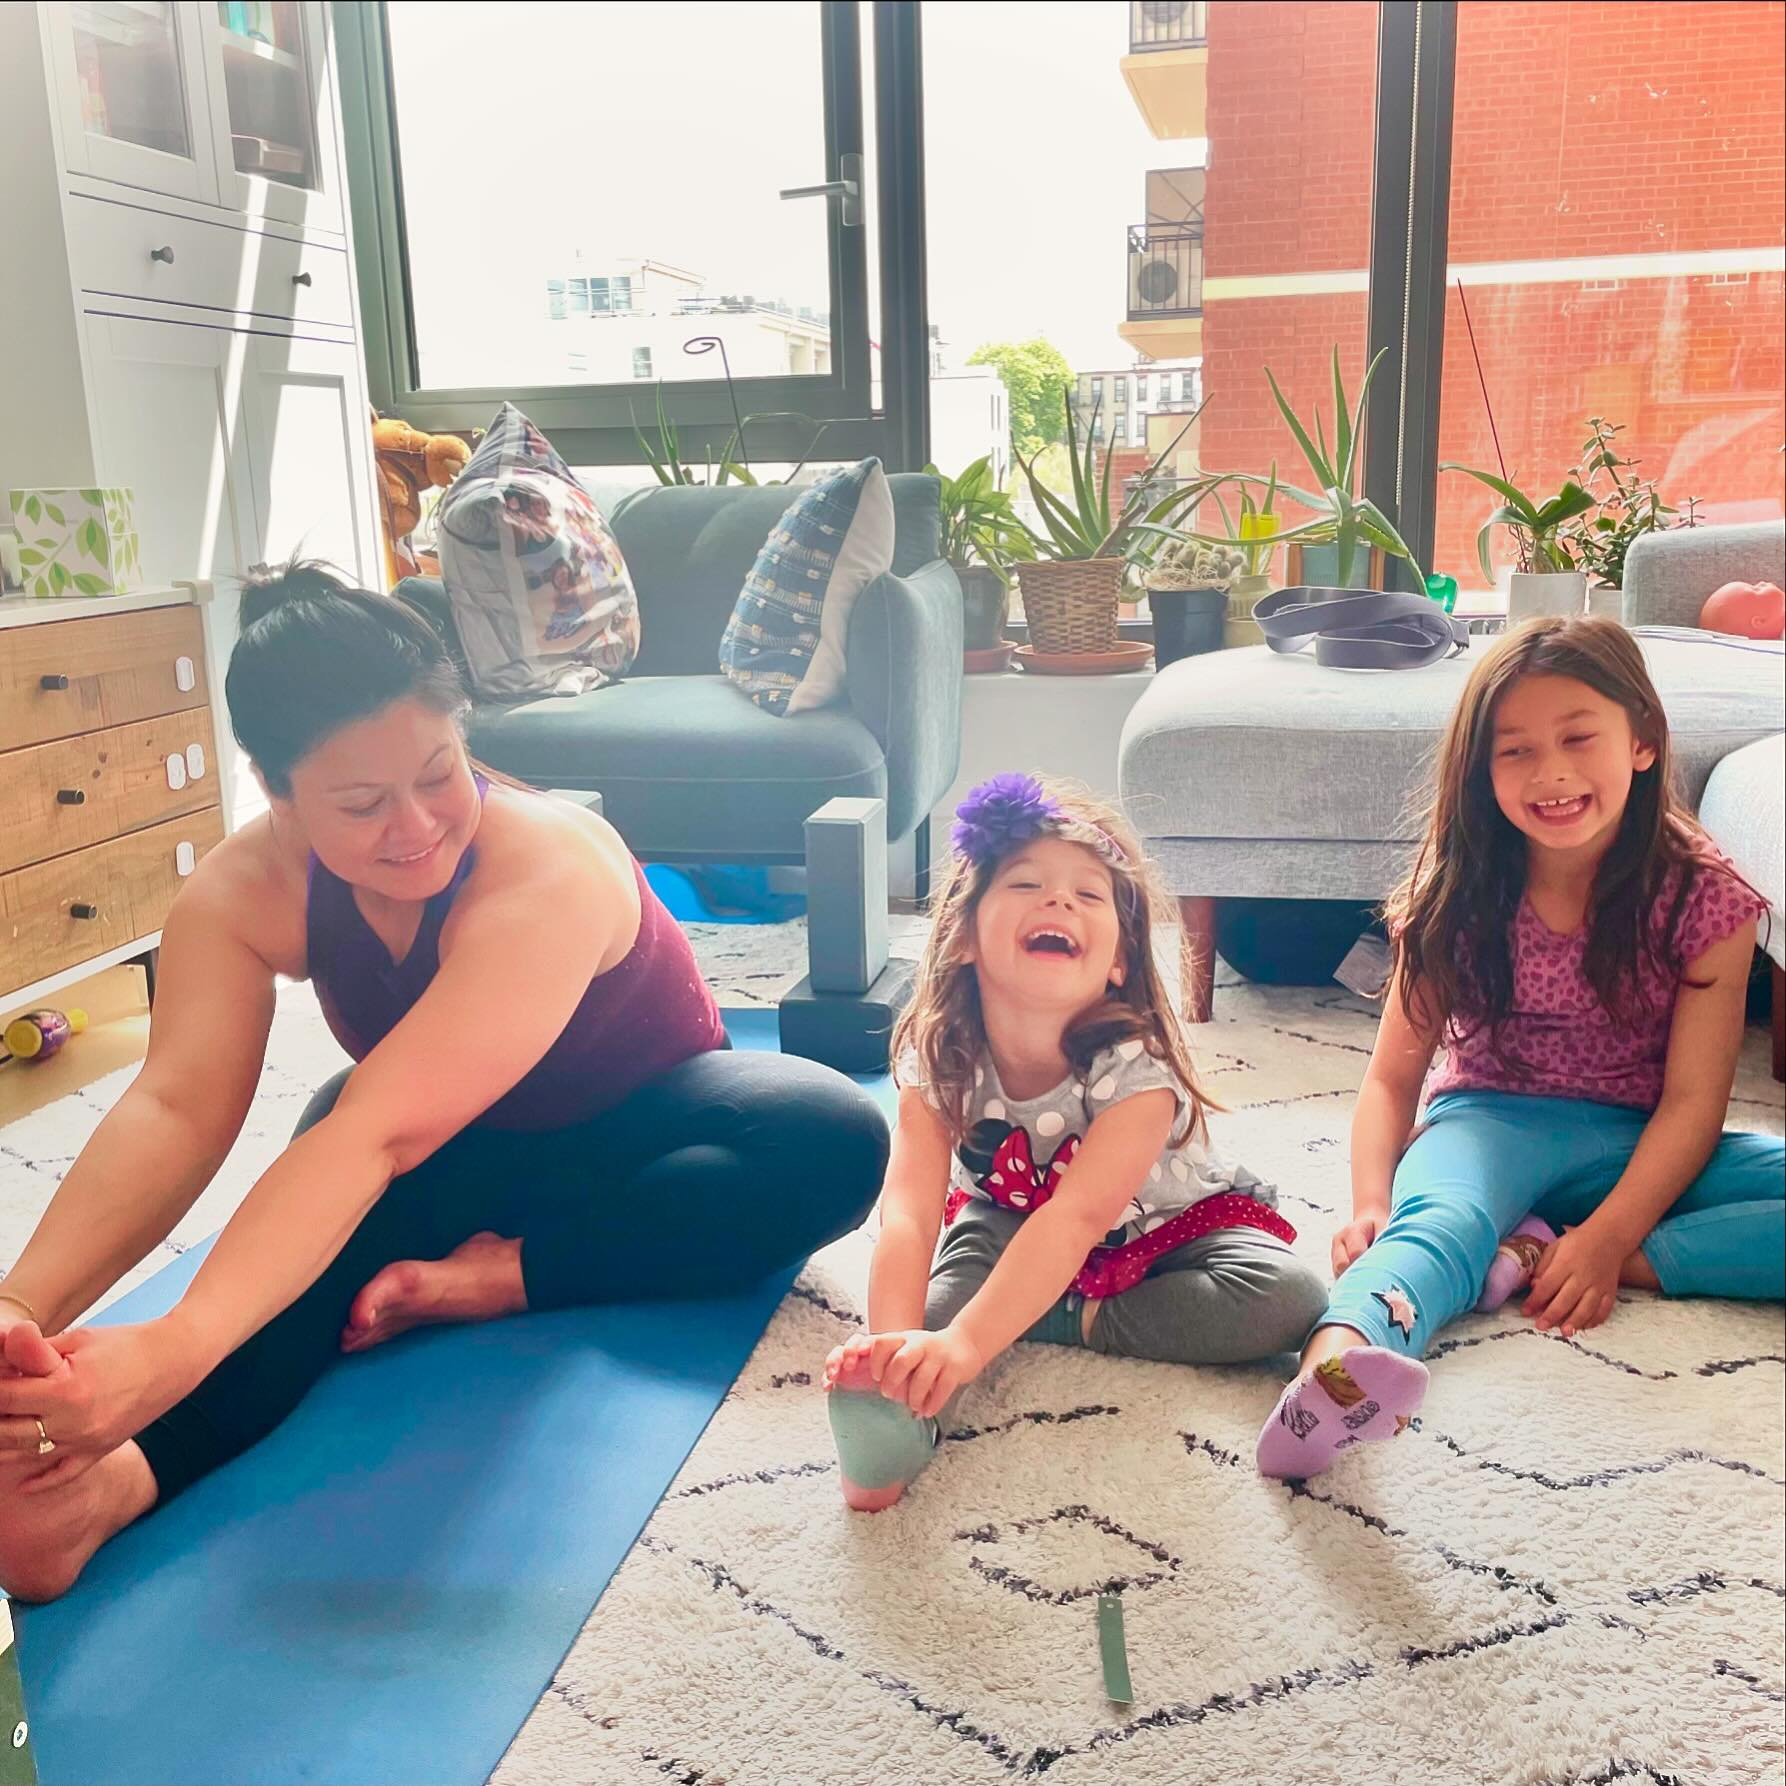 PRIVATE SESSIONS (of which, I don&rsquo;t do many) allow for a deeper focus on details of the individual client&rsquo;s practice needs.

🥰 One of mine was recently crashed by 2 adorable, unexpected guests.

🐝 Buzzing with energy to regain their mom